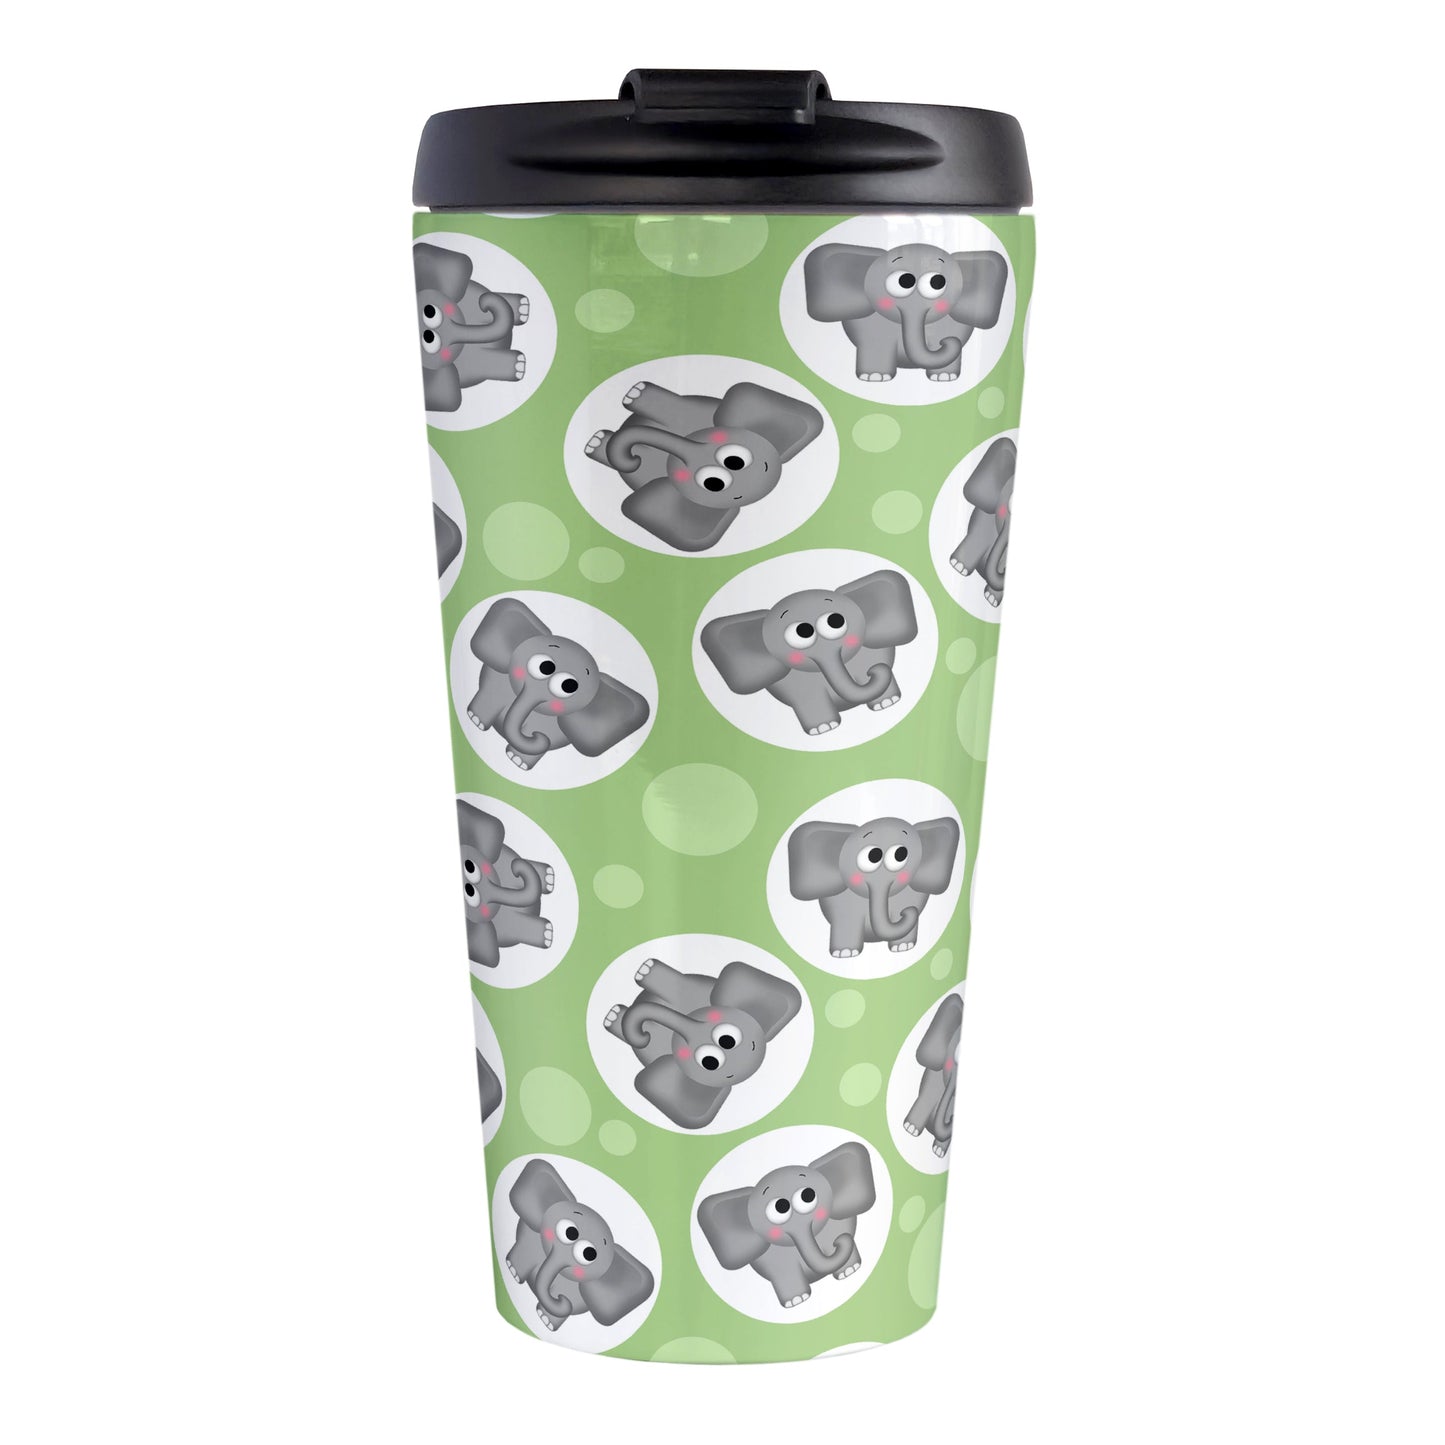 Cute Green Elephant Pattern Travel Mug (15oz, stainless steel insulated) at Amy's Coffee Mugs